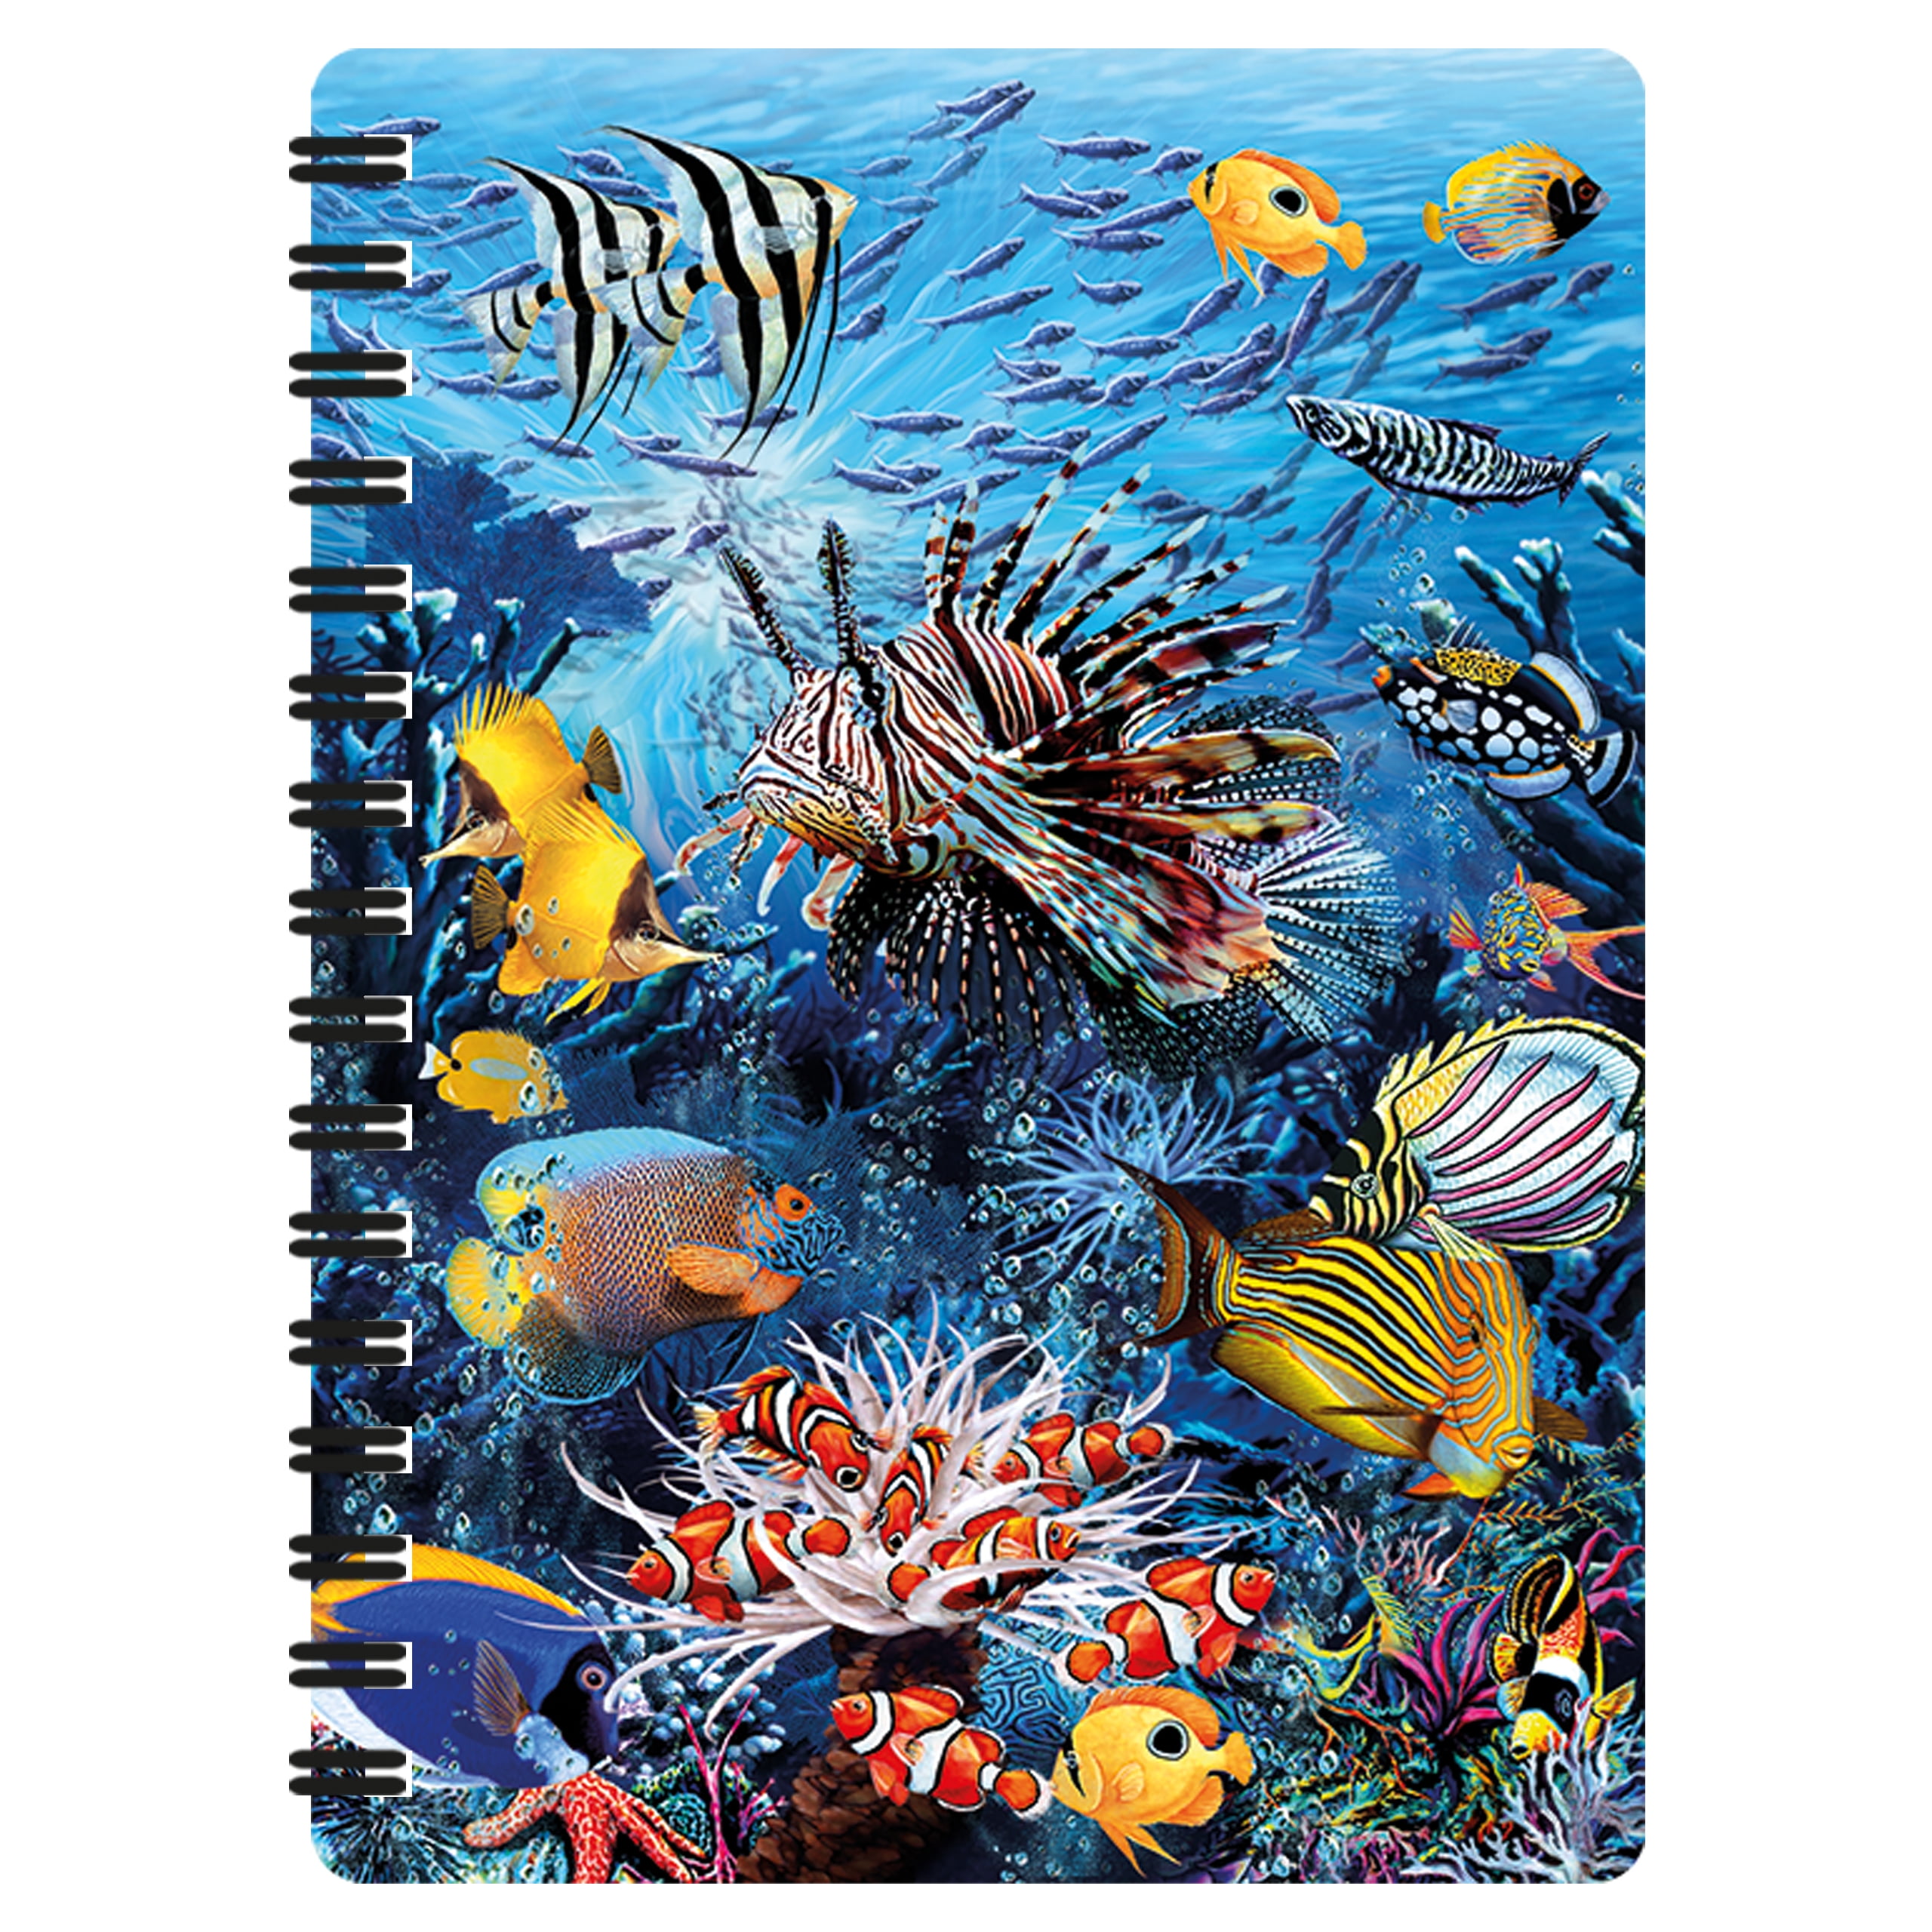 3D LiveLife Jotter - Wonders of the Reef from Deluxebase. Lenticular 3D ...